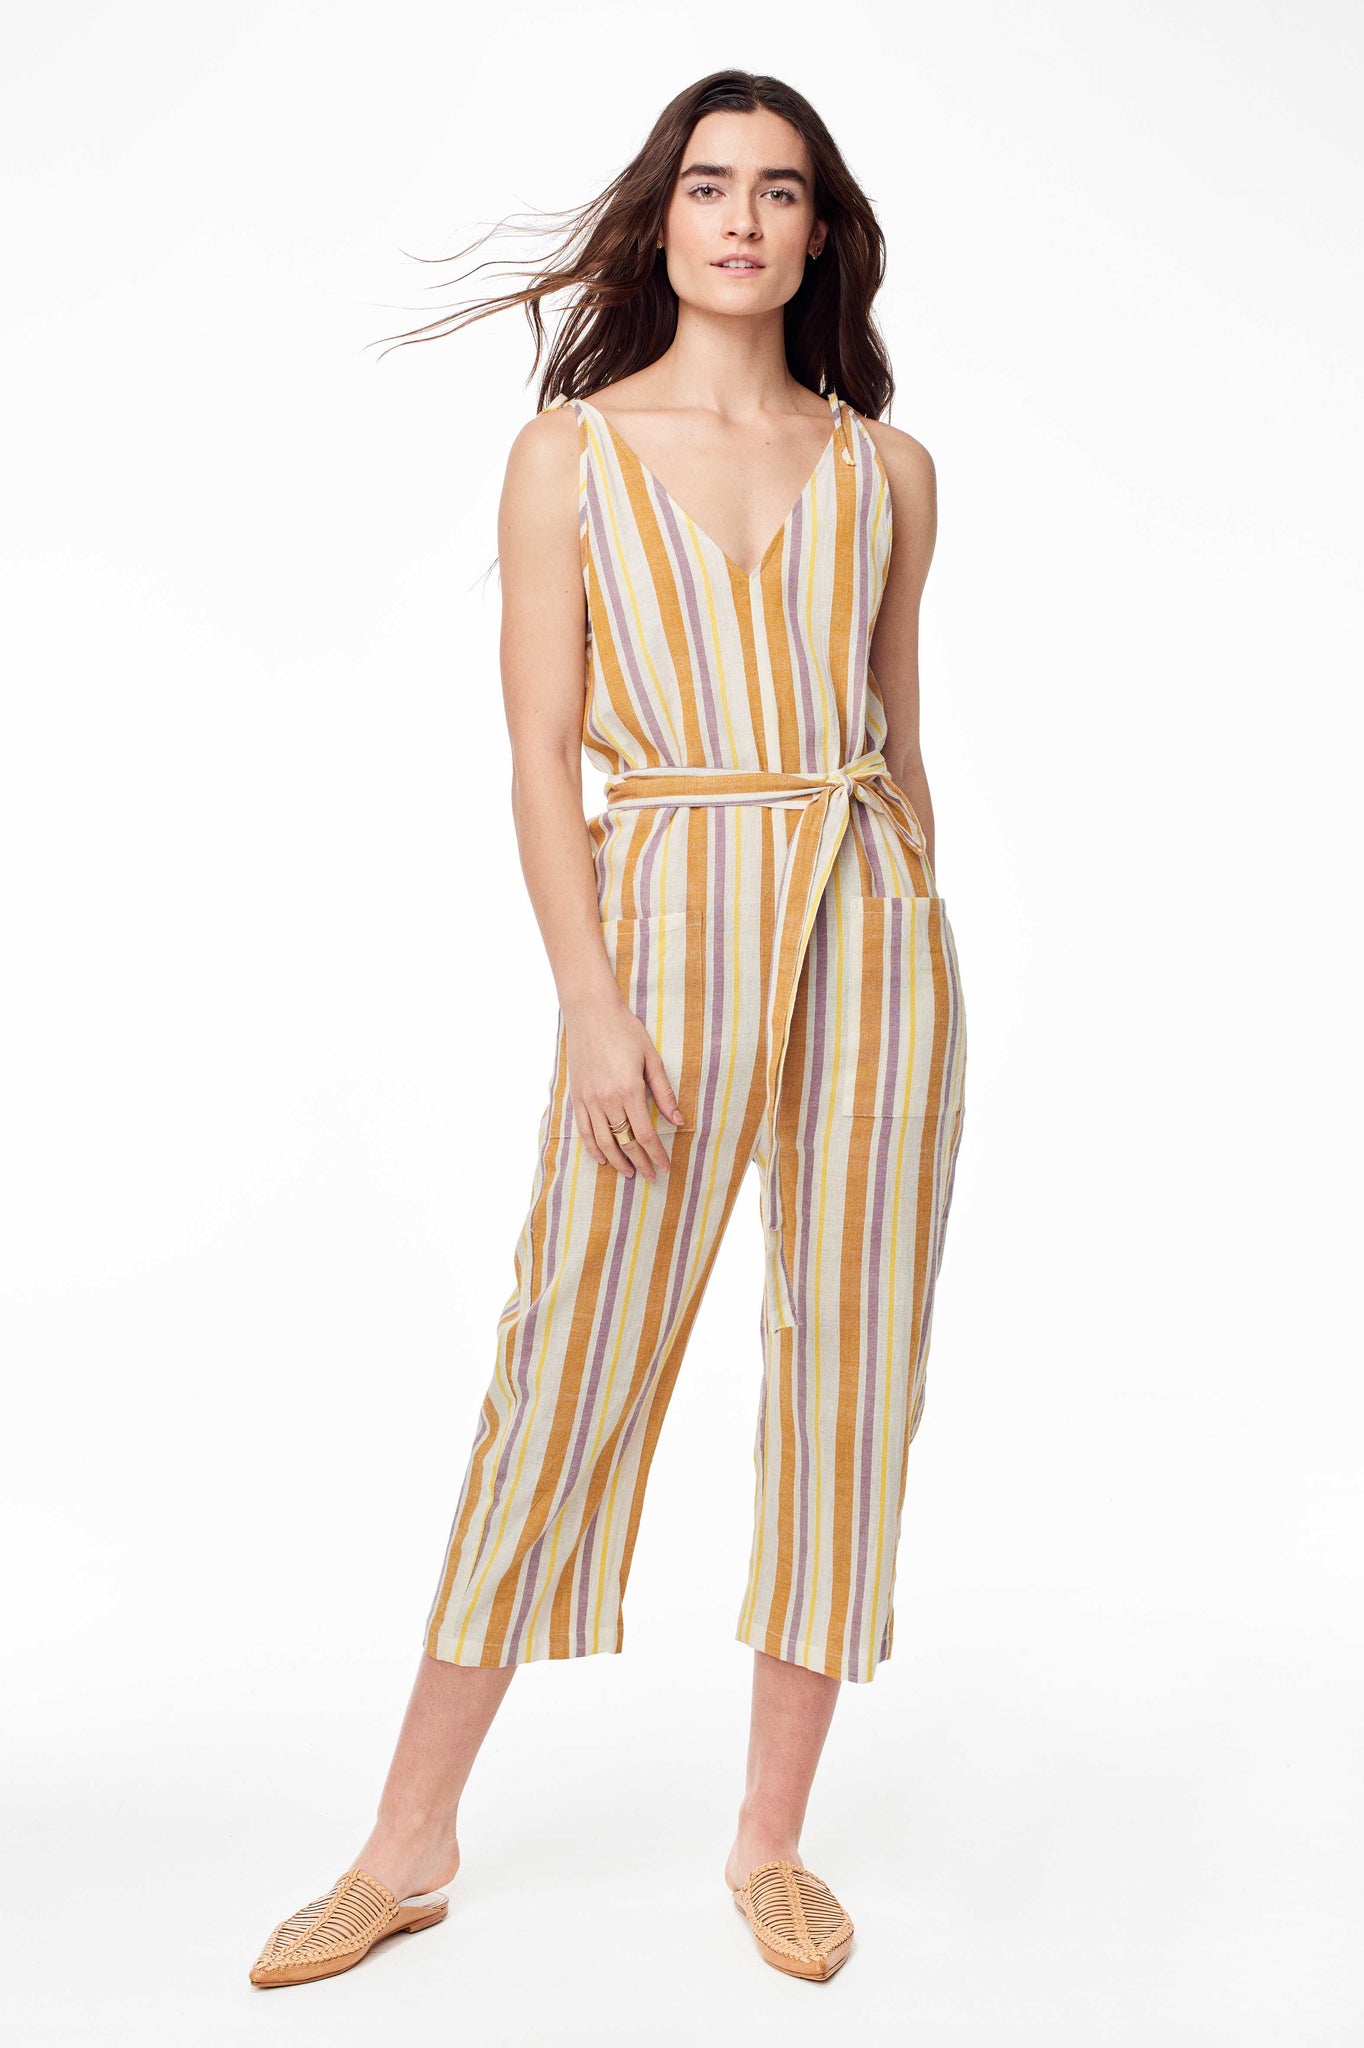 Wax and Cruz Spring 2018 Cabiria Jumpsuit in 70's Stripe. Soft handwoven cotton and sexy shoulder ties. V-neckline with removable matching tie wasit belt. Loose fitting with front patch pockets on trouser. Ankle crop. Unlined. Small/Medium measures 50.5 inches from shoulder to hem. Color yellow stripe. 100% cotton. Sizes Small/Medium Medium/Large.